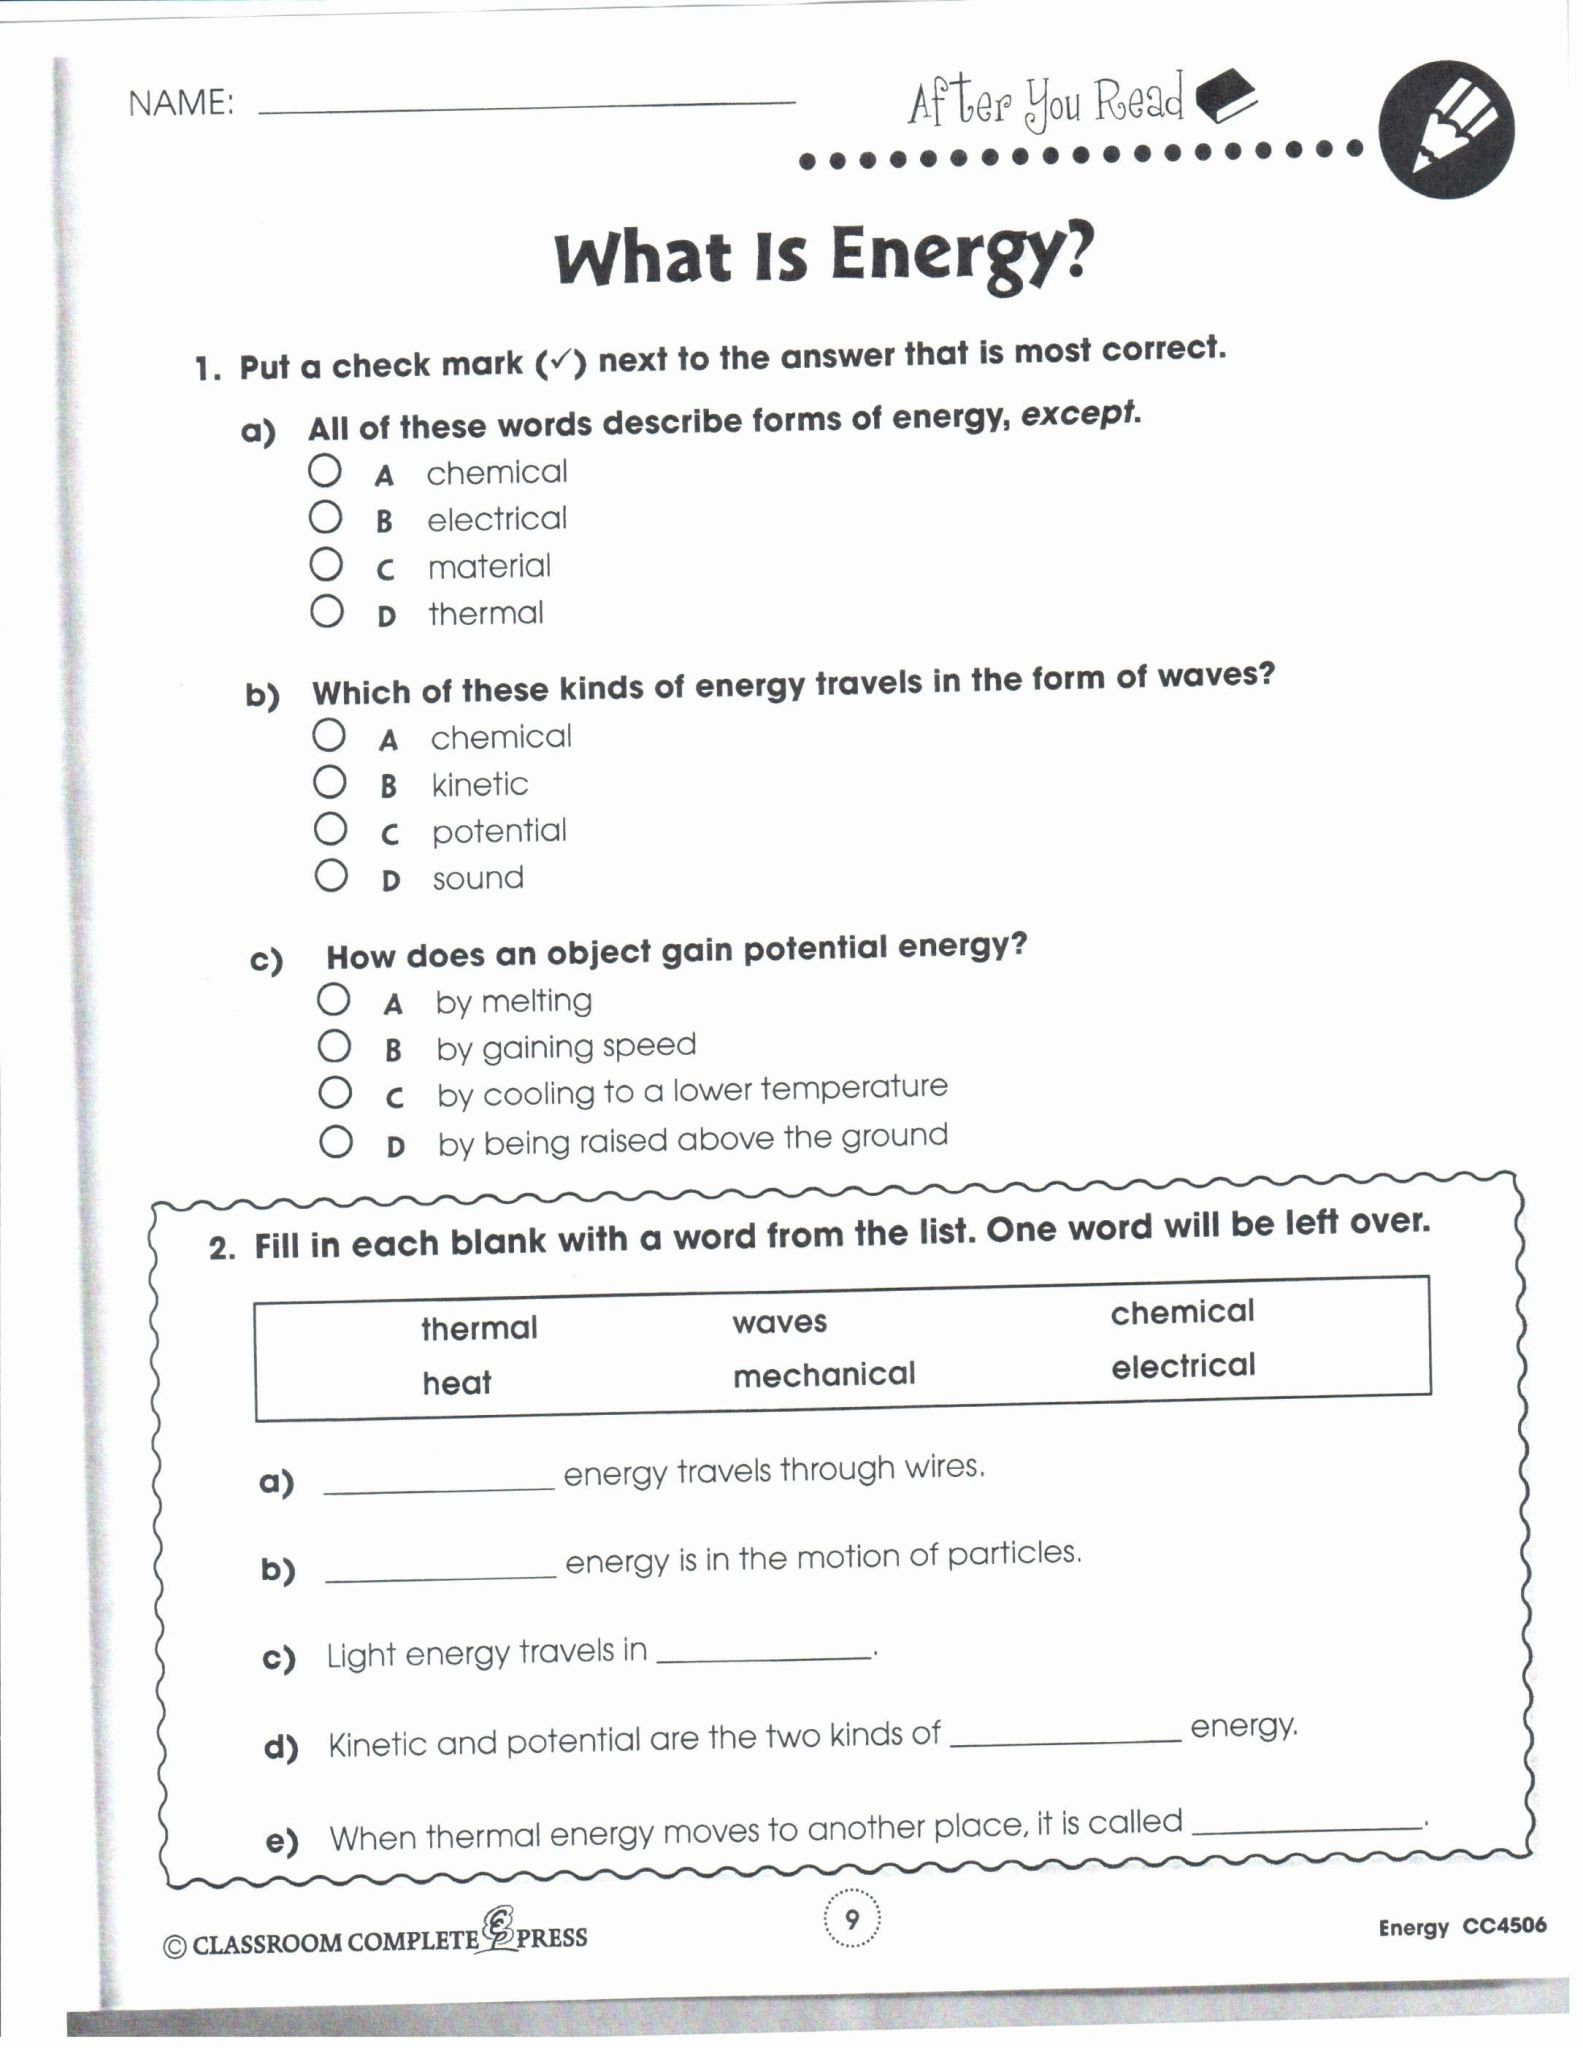 Geologic Time Scale Worksheet Answers  Briefencounters And Geologic Time Scale Worksheet Answers